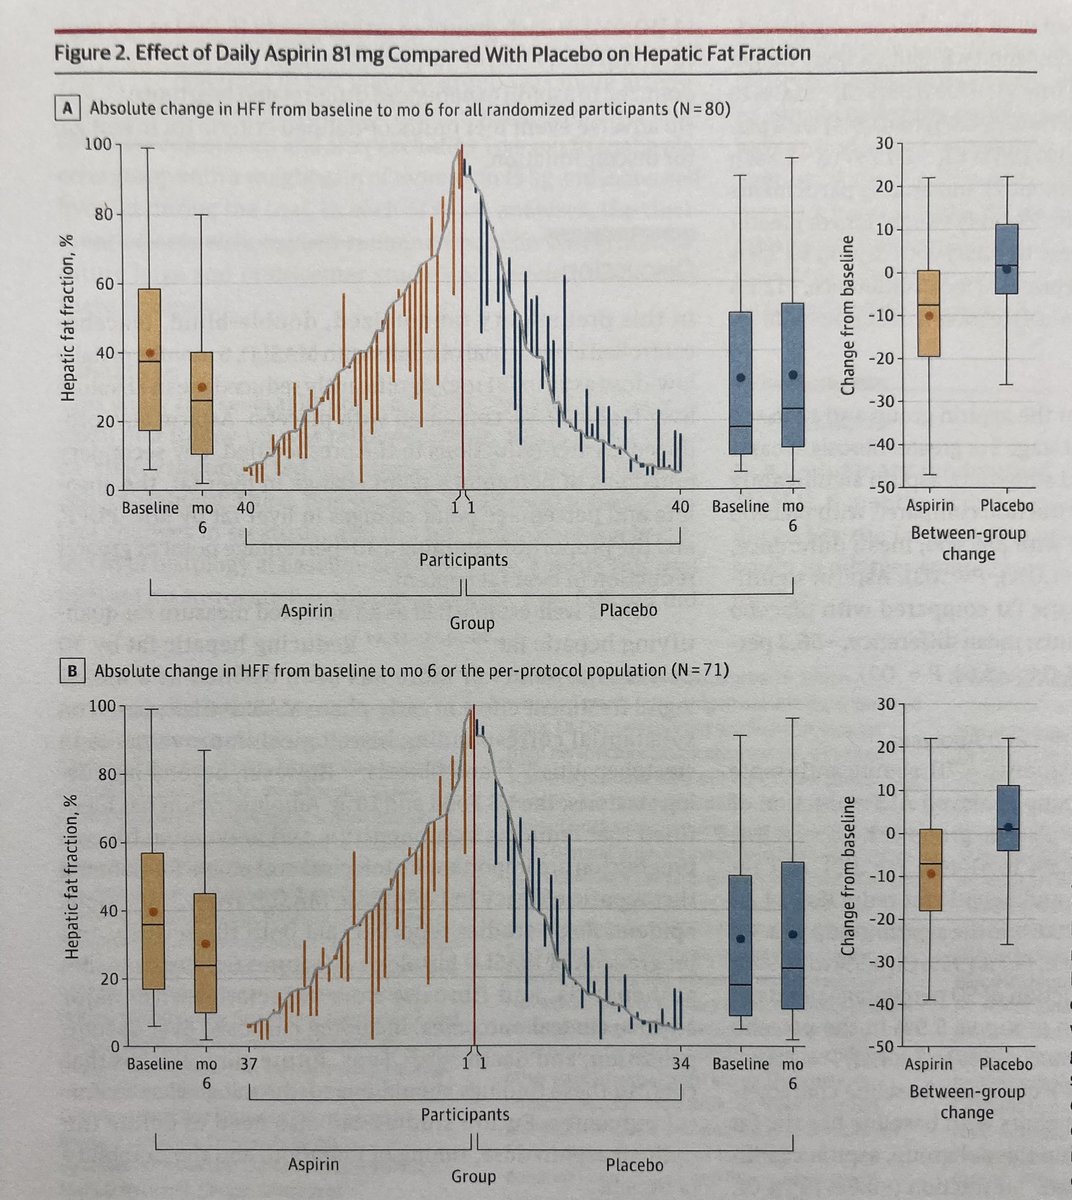 #hepjc 

thanks to Dr Julie Thompson and GI fellow Dr Neer Dutta for presenting at hepatology journal club!

Mortality rates in NHANES for NAFLD vs MASLD in @JHepatology 

RCT for ASA on liver fat content in MASLD? in @JAMA_current